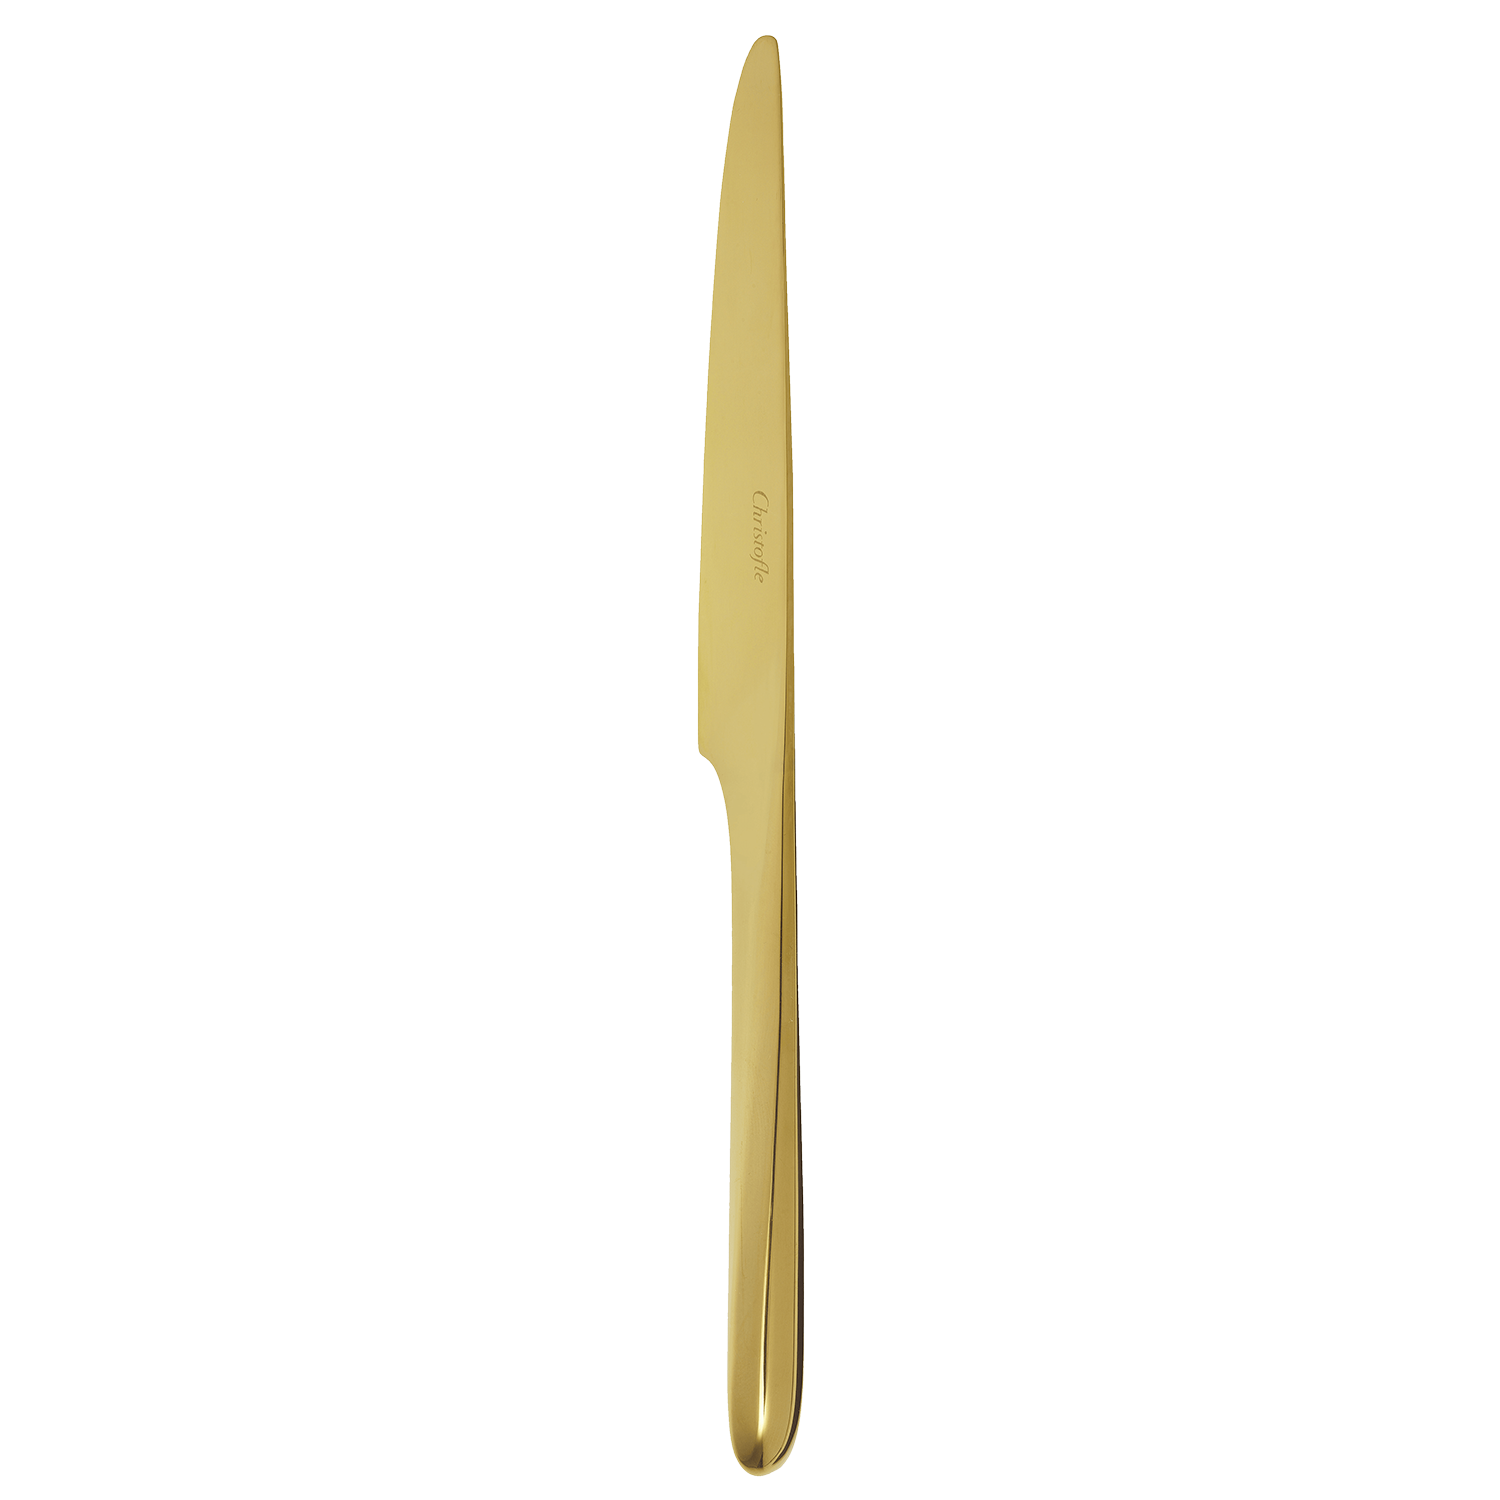 Gold stainless steel table knife